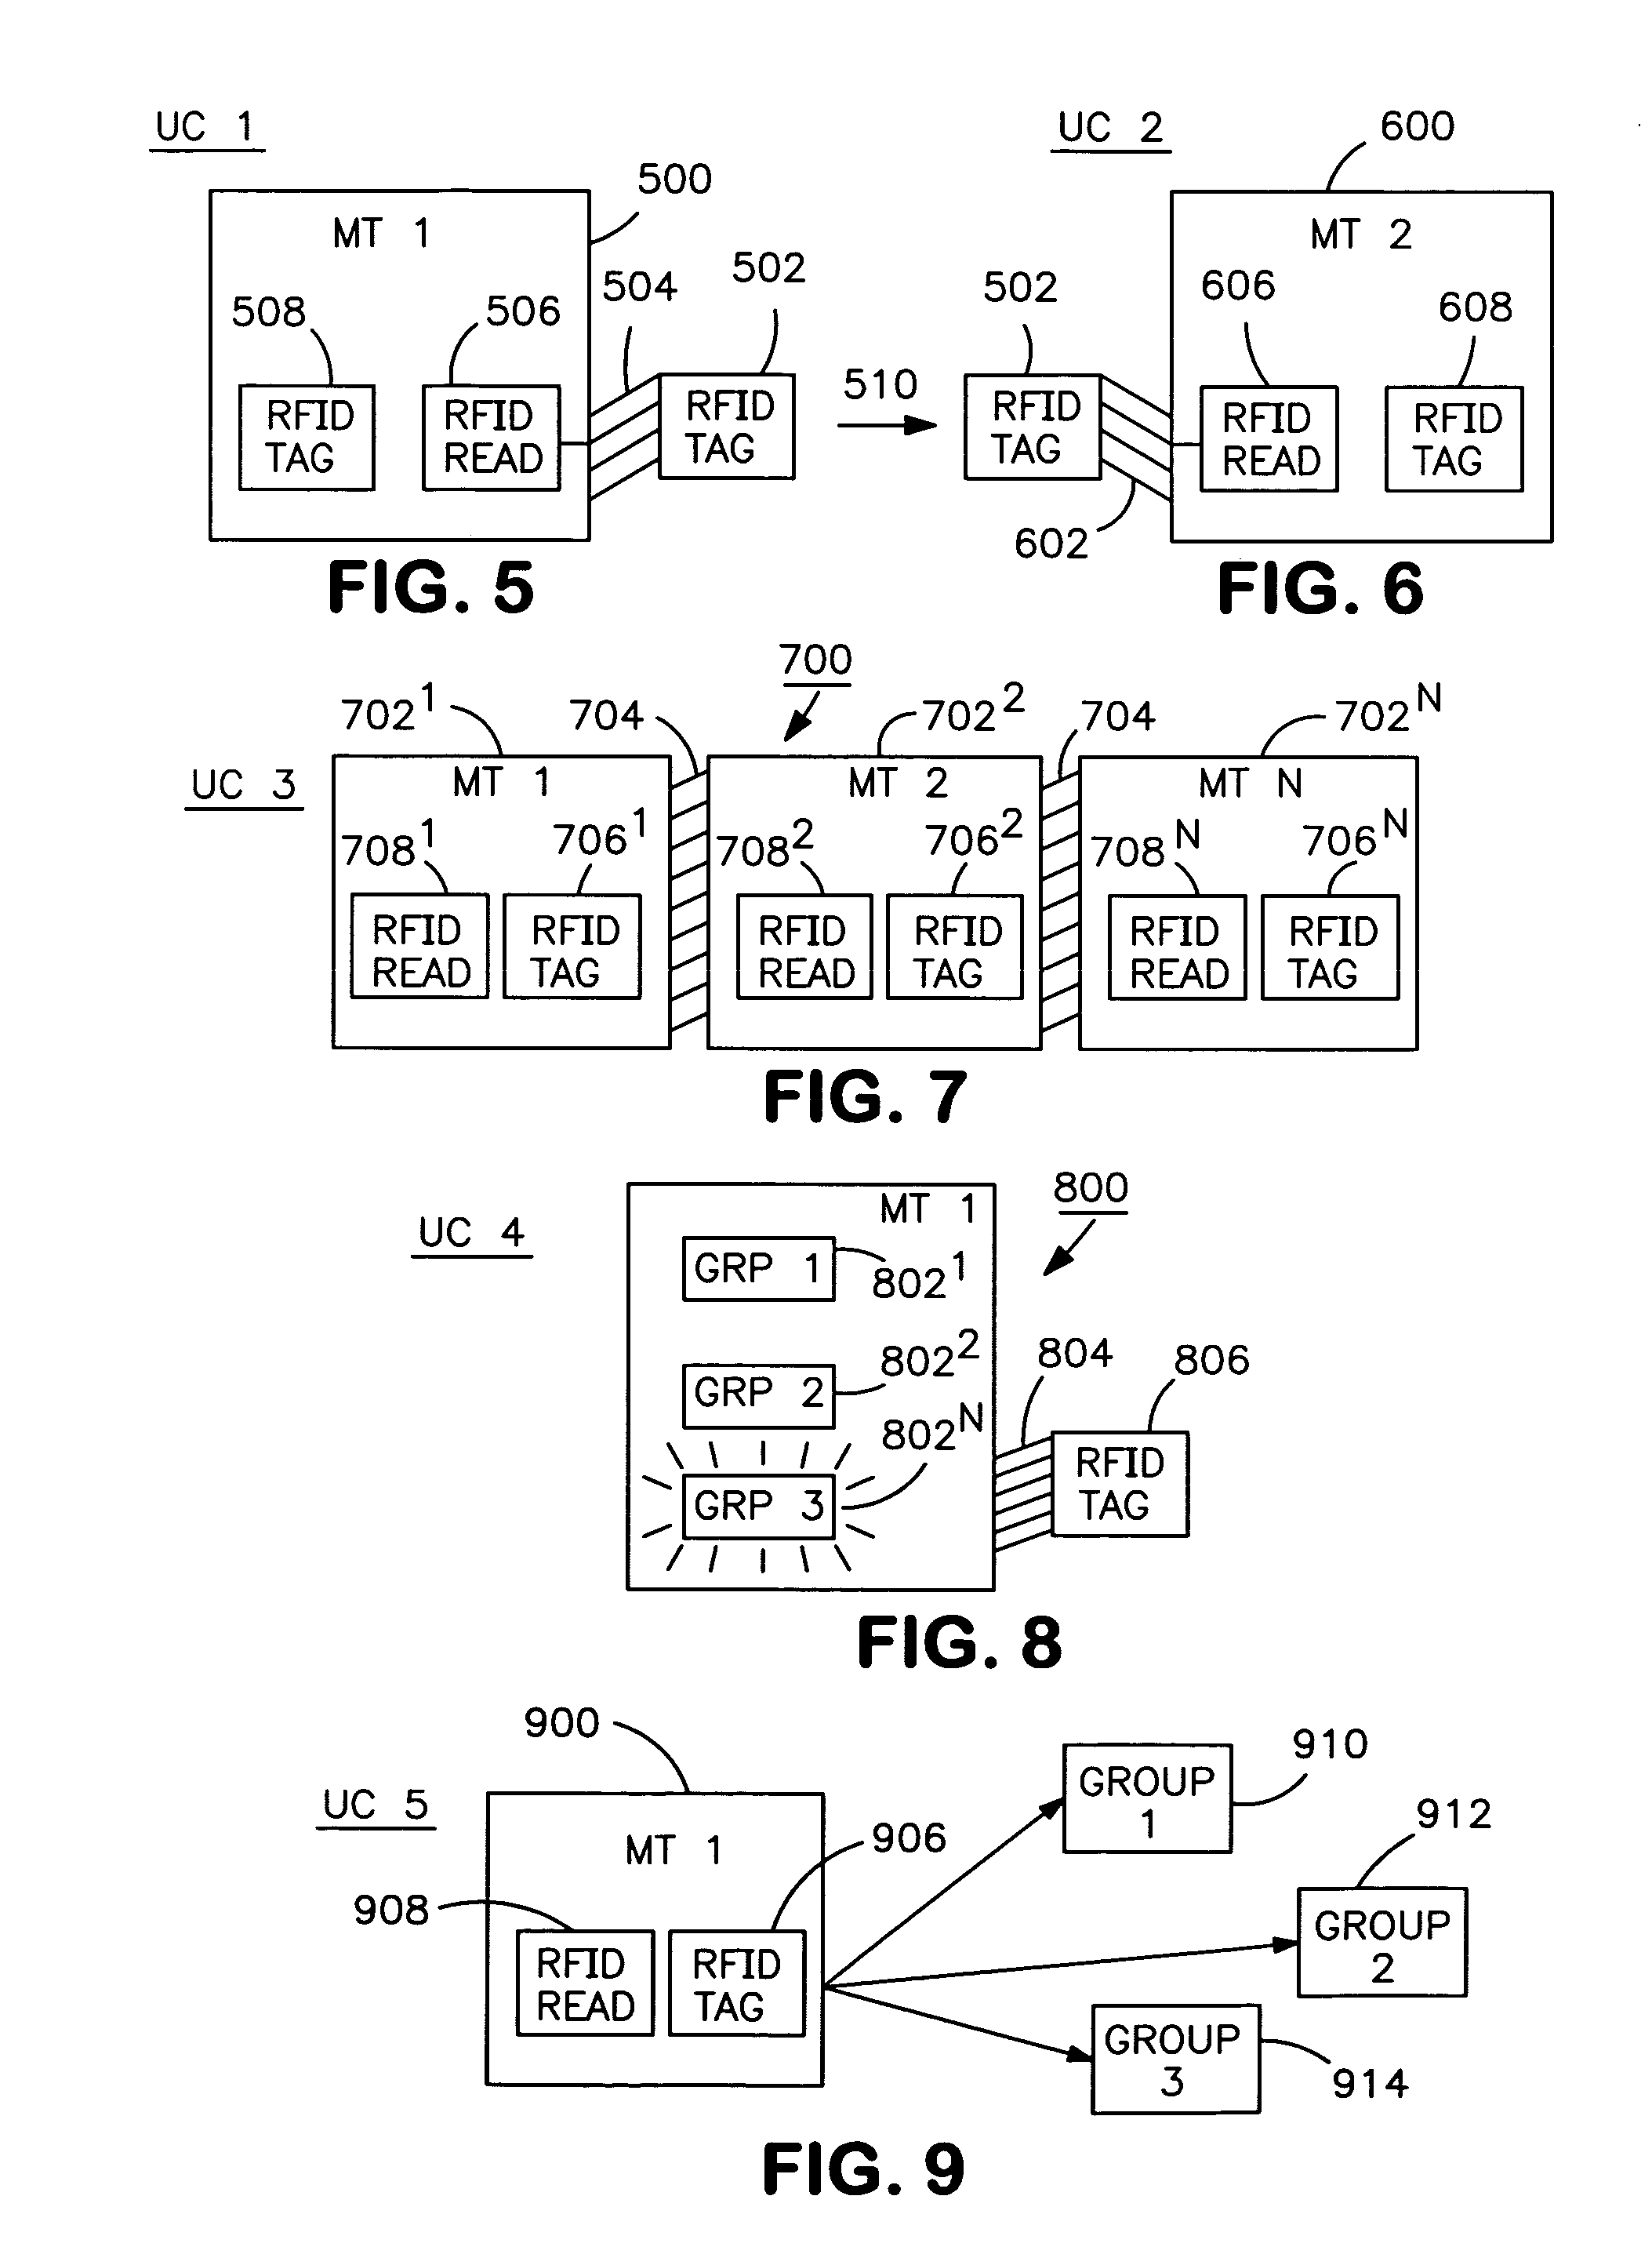 Push-to-talk over cellular group set-up and handling using near field communication (NFC)